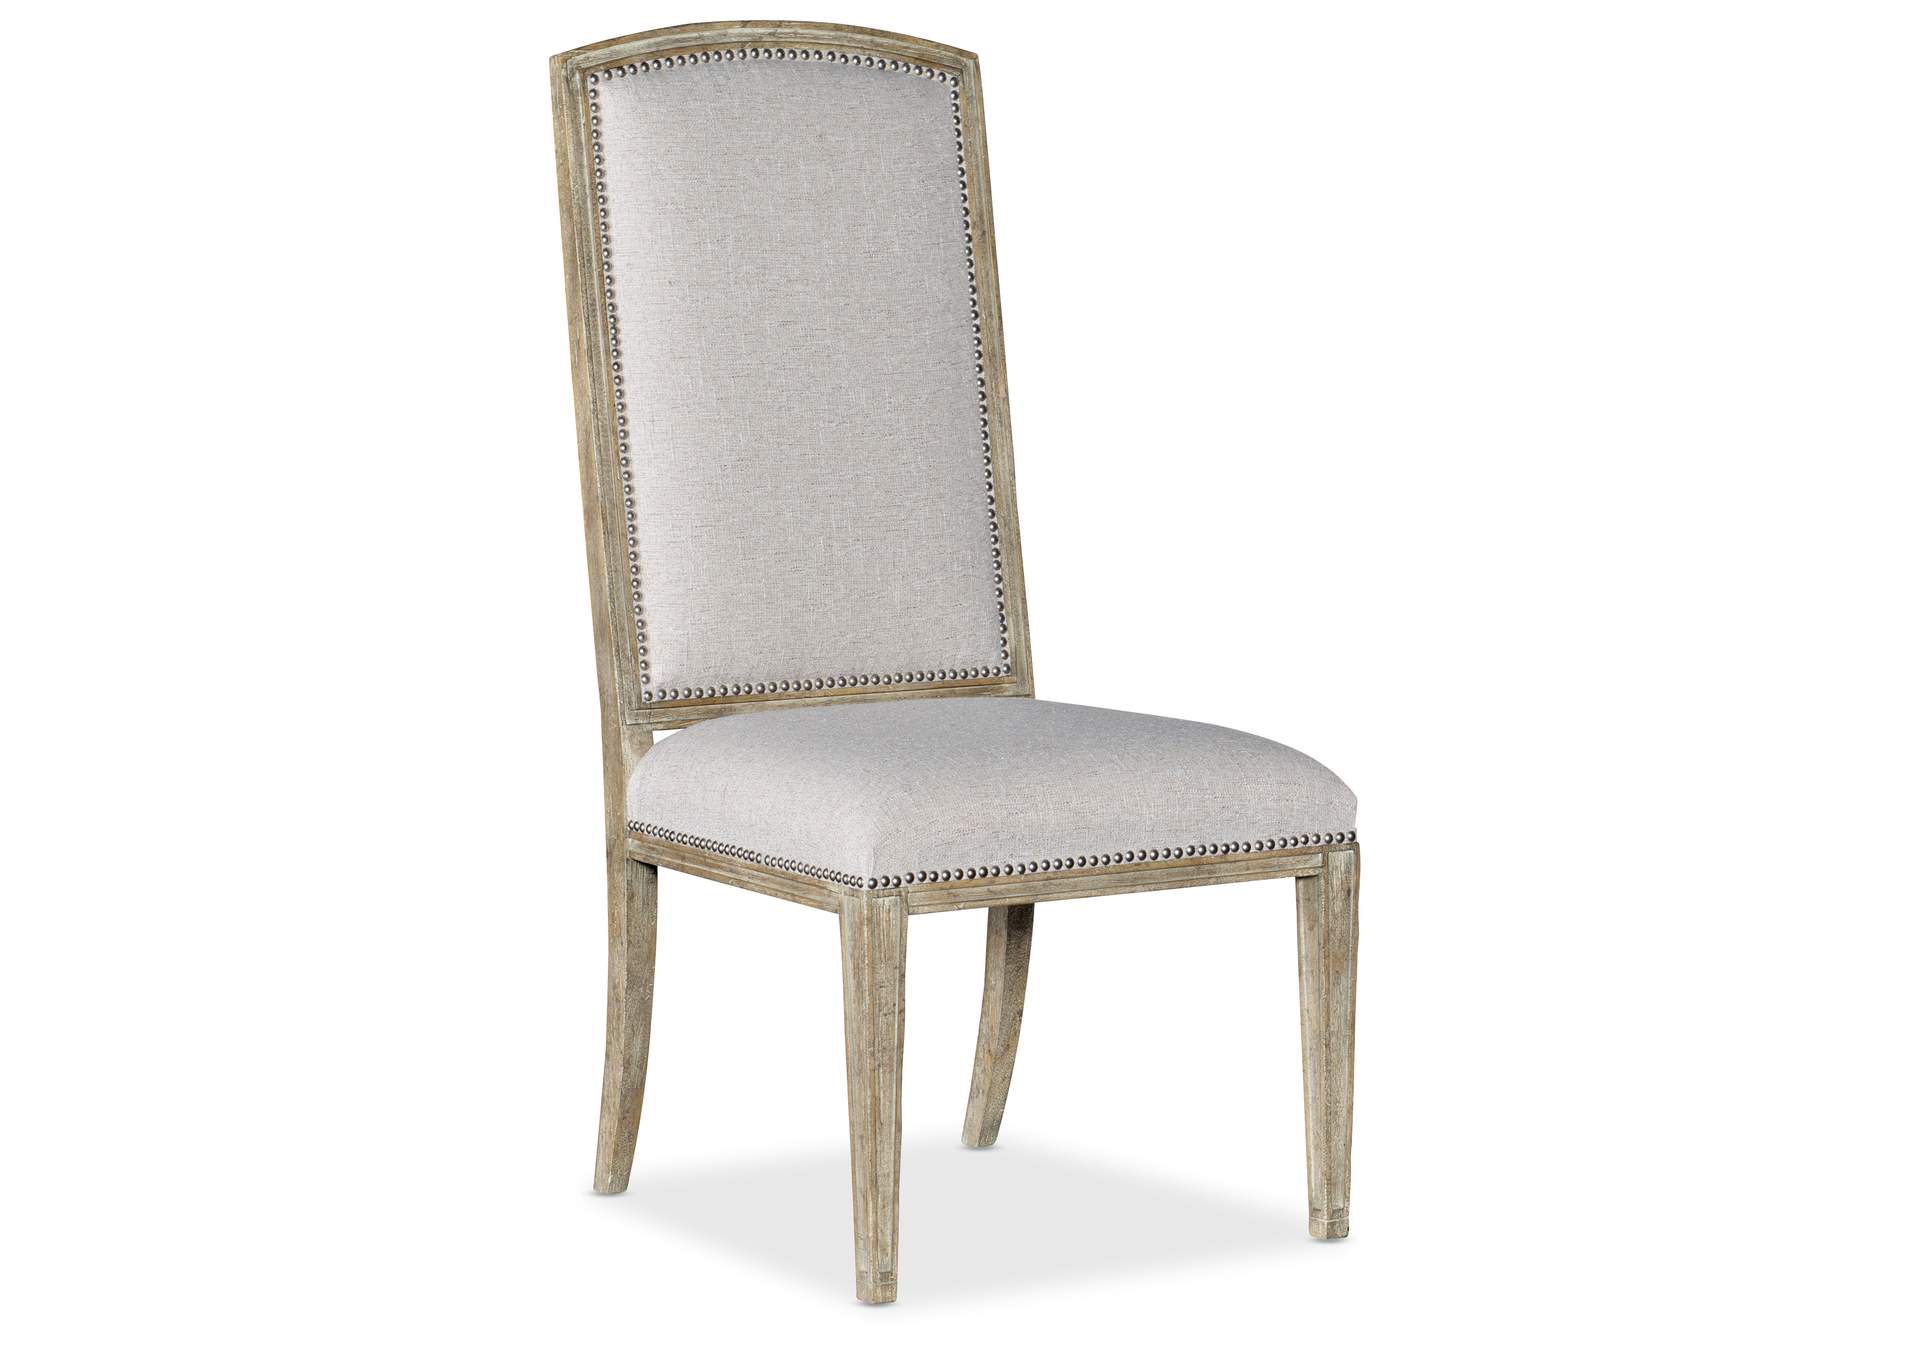 Castella Upholstered Side Chair - 2 Per Carton - Price Ea